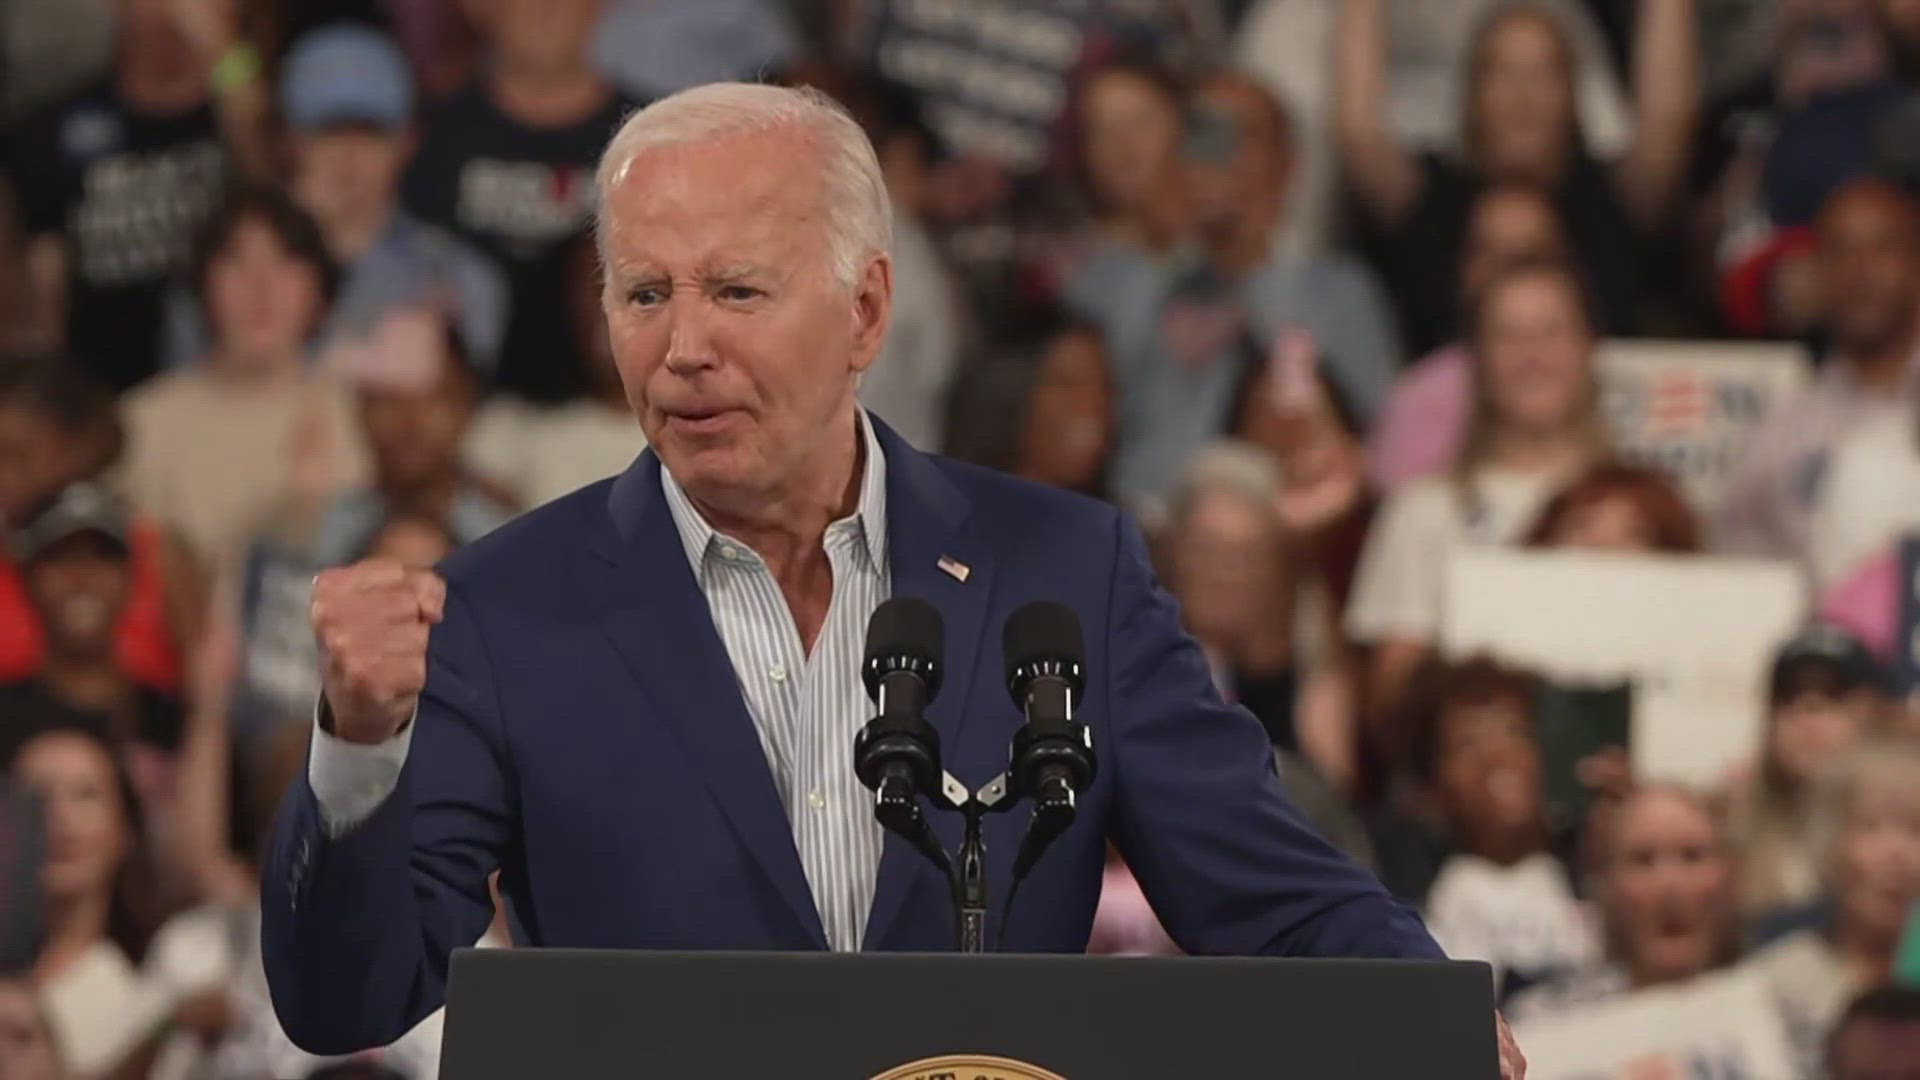 President Joe Biden is back on the campaign trail after getting criticism from fellow democrats for what they say was a poor performance at the debate Thursday night